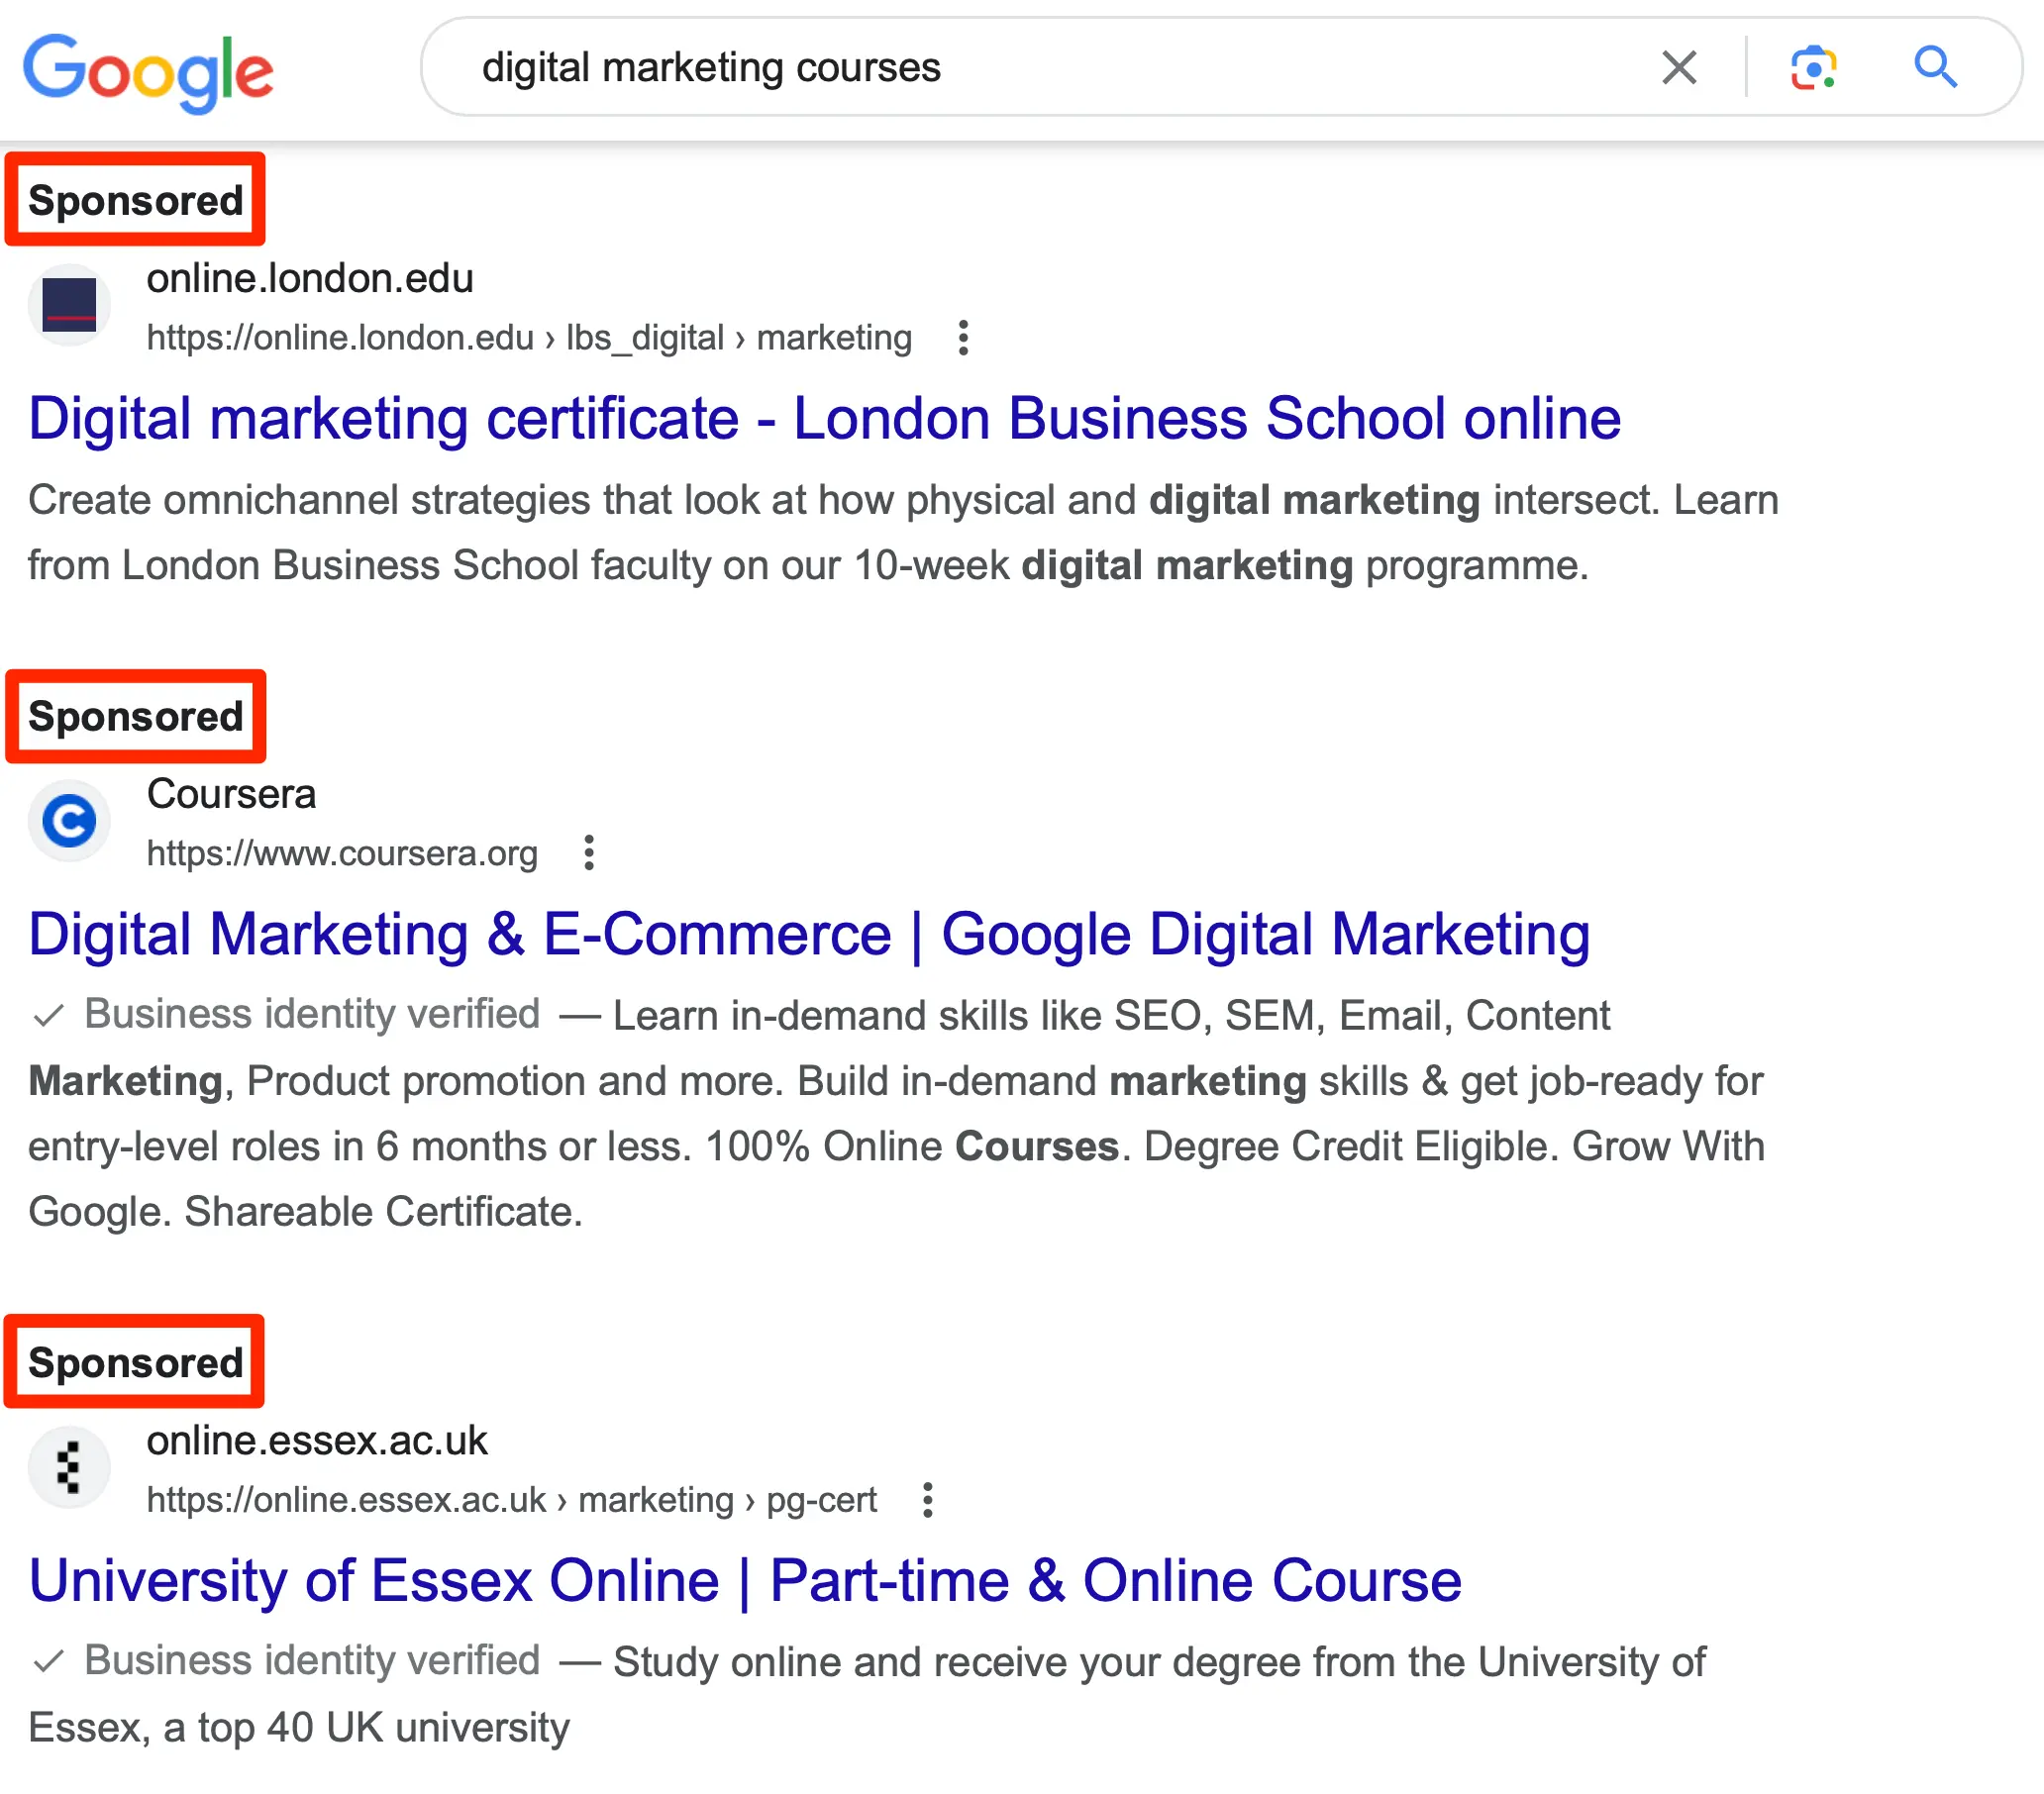 Example of Search Ads